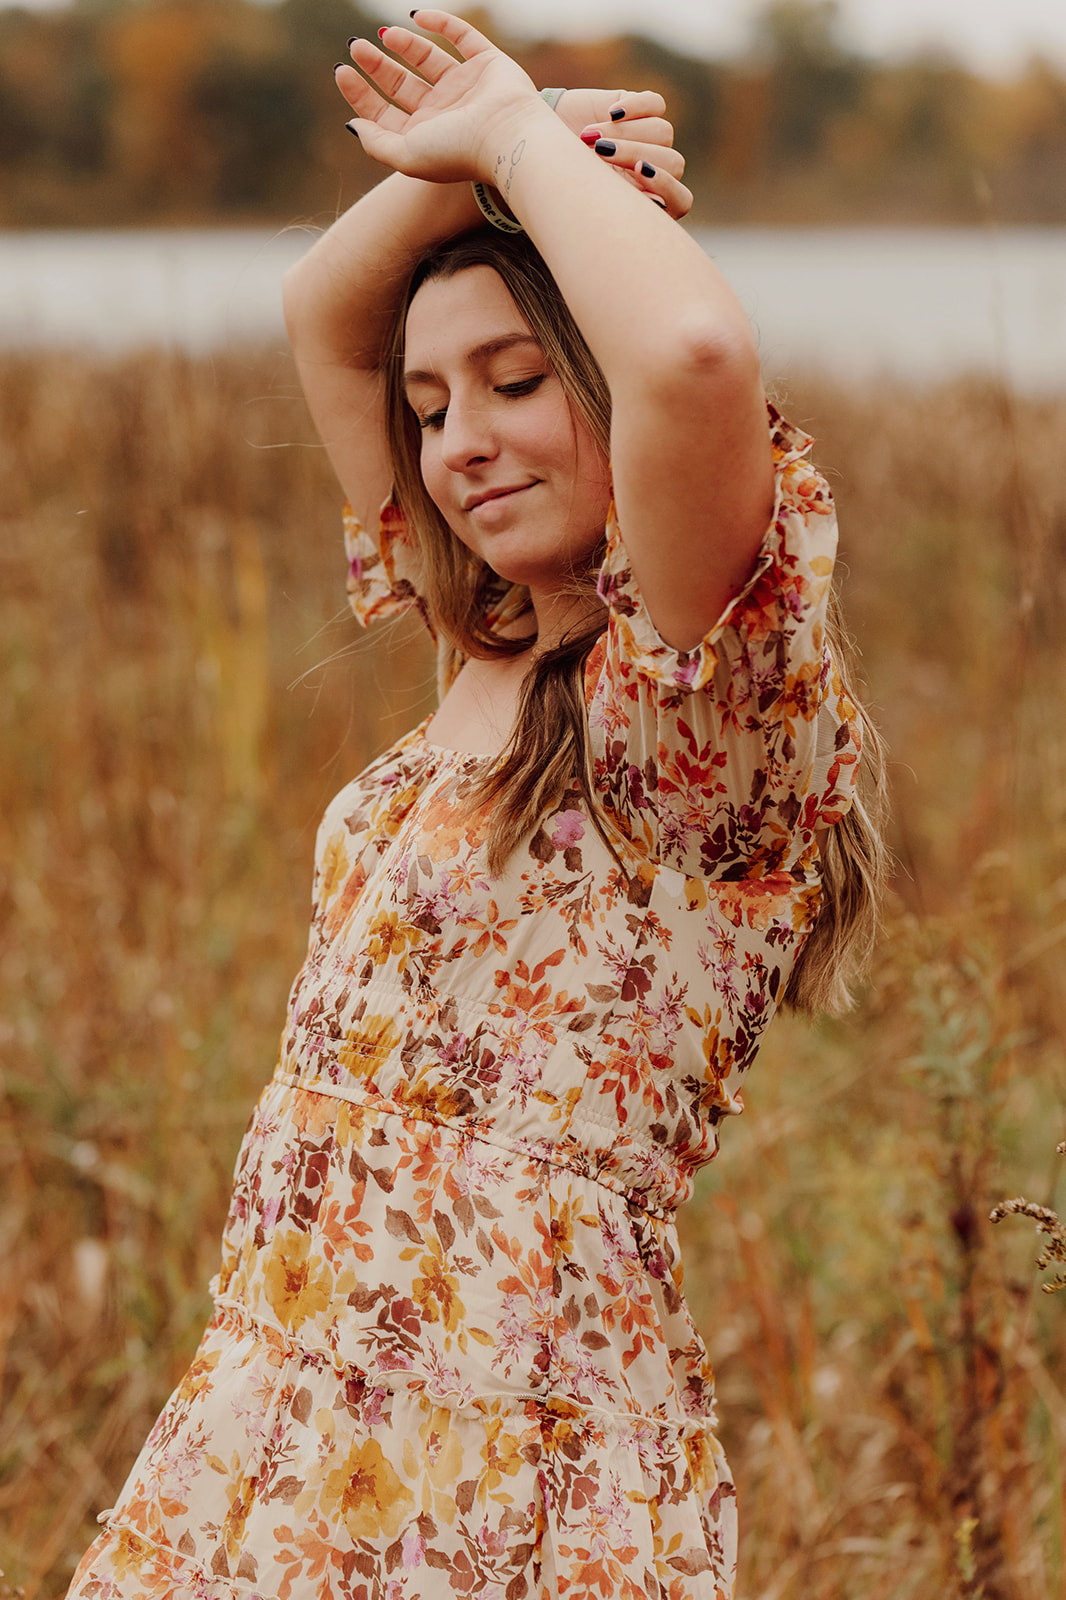 Senior picture outfit ideas: Stunning senior wearing a floral dress and raising her hands over her head as she smiles during the shoot in the middle of a field.